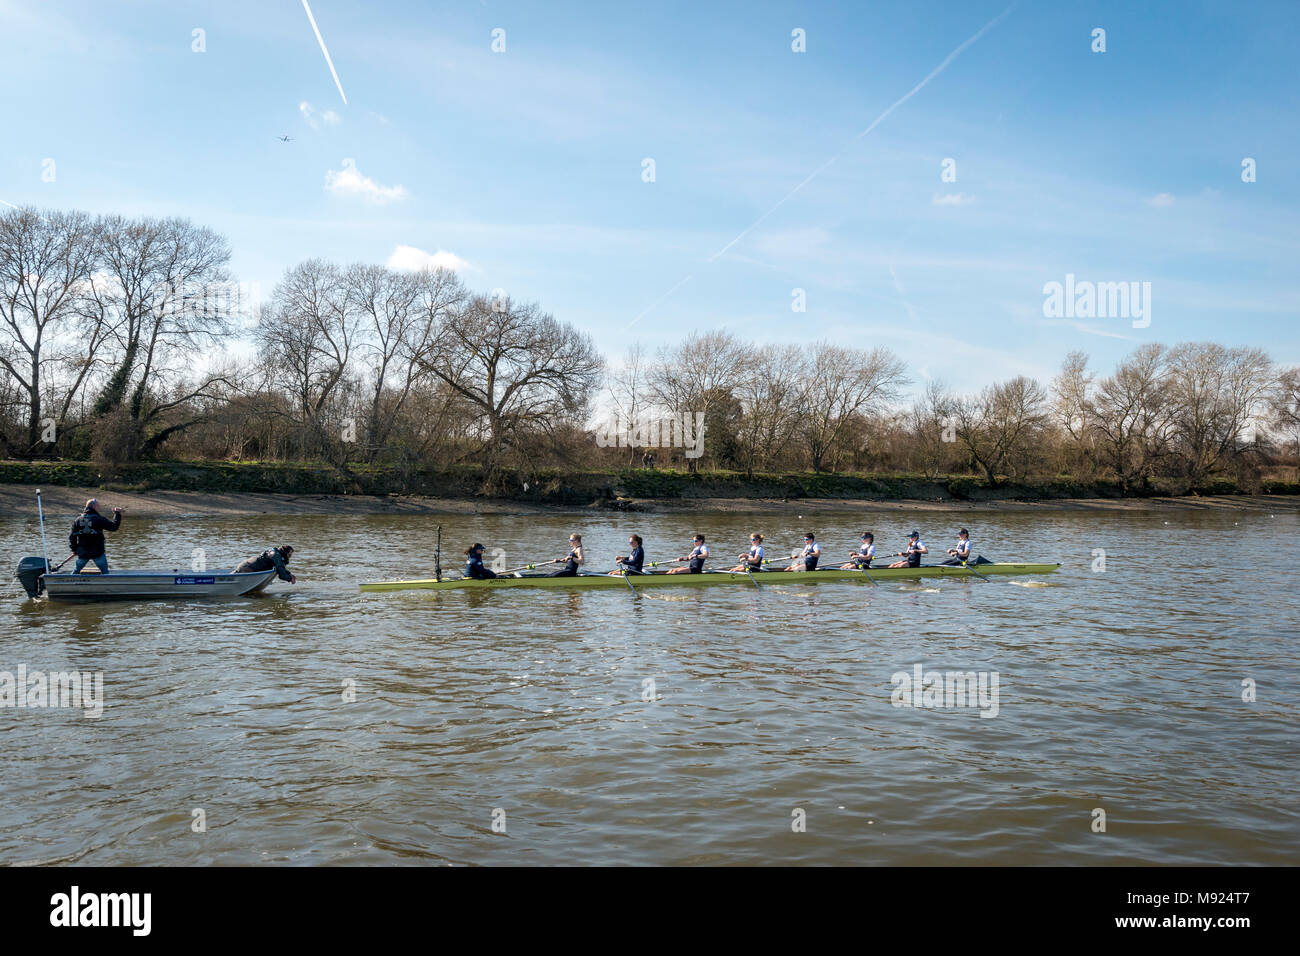 Putney, London, UK. 21 March 2018. Boat Race Practice Outing.  As preparation for the The Cancer Research UK Boat Races on 24 March 2018, Oxford University Women's Boat Club's Blue crew participate in a Practice Outing on the the Boat Race Tideway course.  Coach Andy Nelder follows the boat  Crew list:-  OUWBC Blue crew). Bow:- Renée Koolschijn, 2) Katherine Erickson, 3) Juliette Perry, 4) Alice Roberts, 5) Morgan McGovern, 6) Sara Kushma, 7) Abigail Killen, Stroke:- Beth Bridgman, Cox: Jessica Buck. Credit: Duncan Grove/Alamy Live News Stock Photo